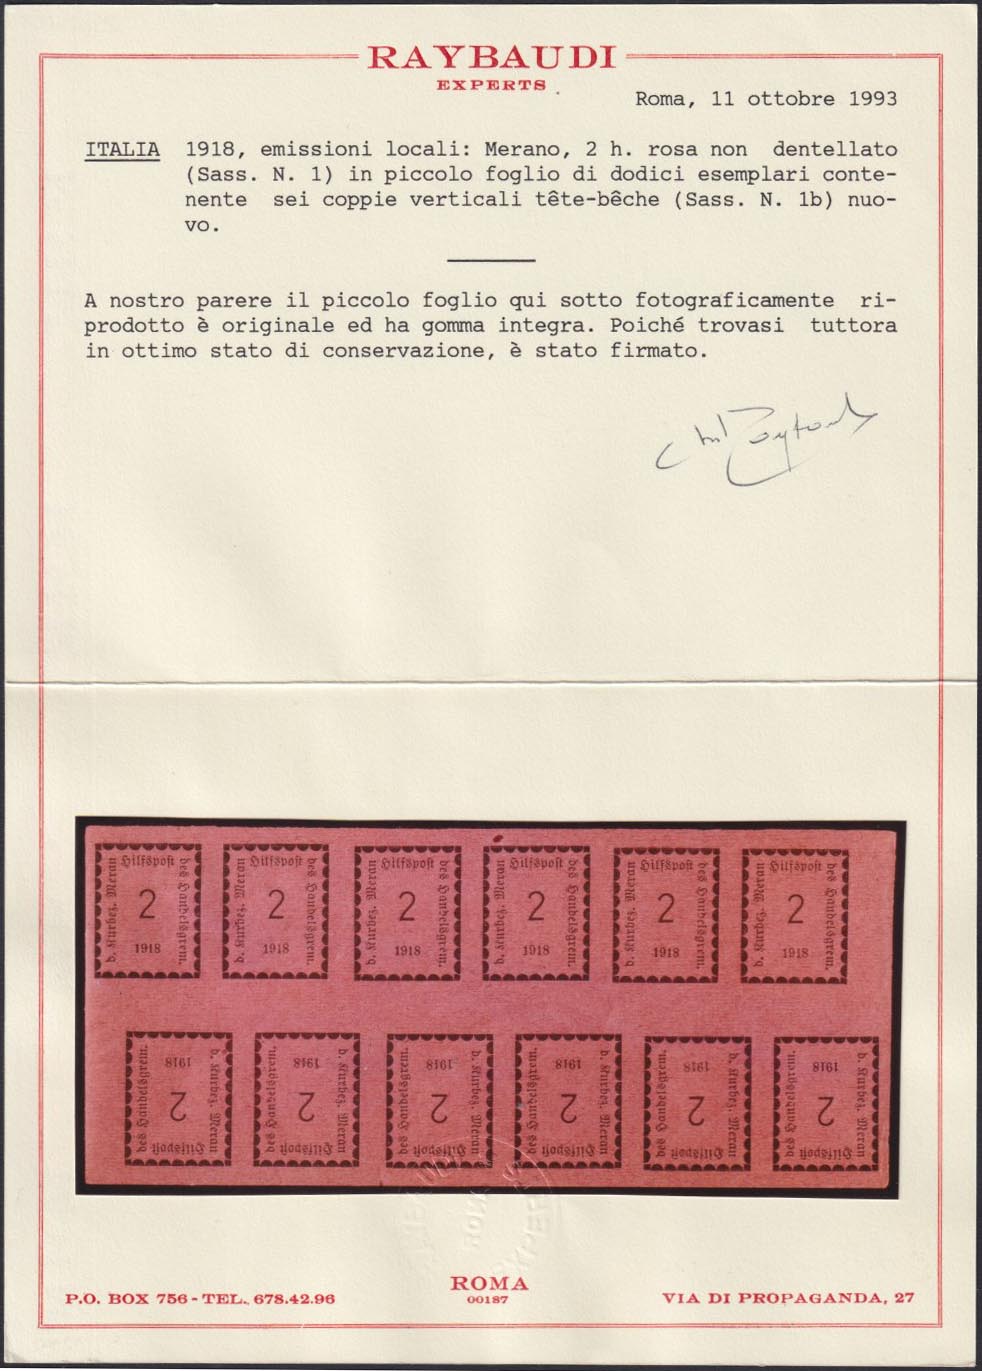 MER16 - Merano, 1st issue, 2 pink heller sheets of 12 copies in two strips of six sheets, new with intact gum (1B)